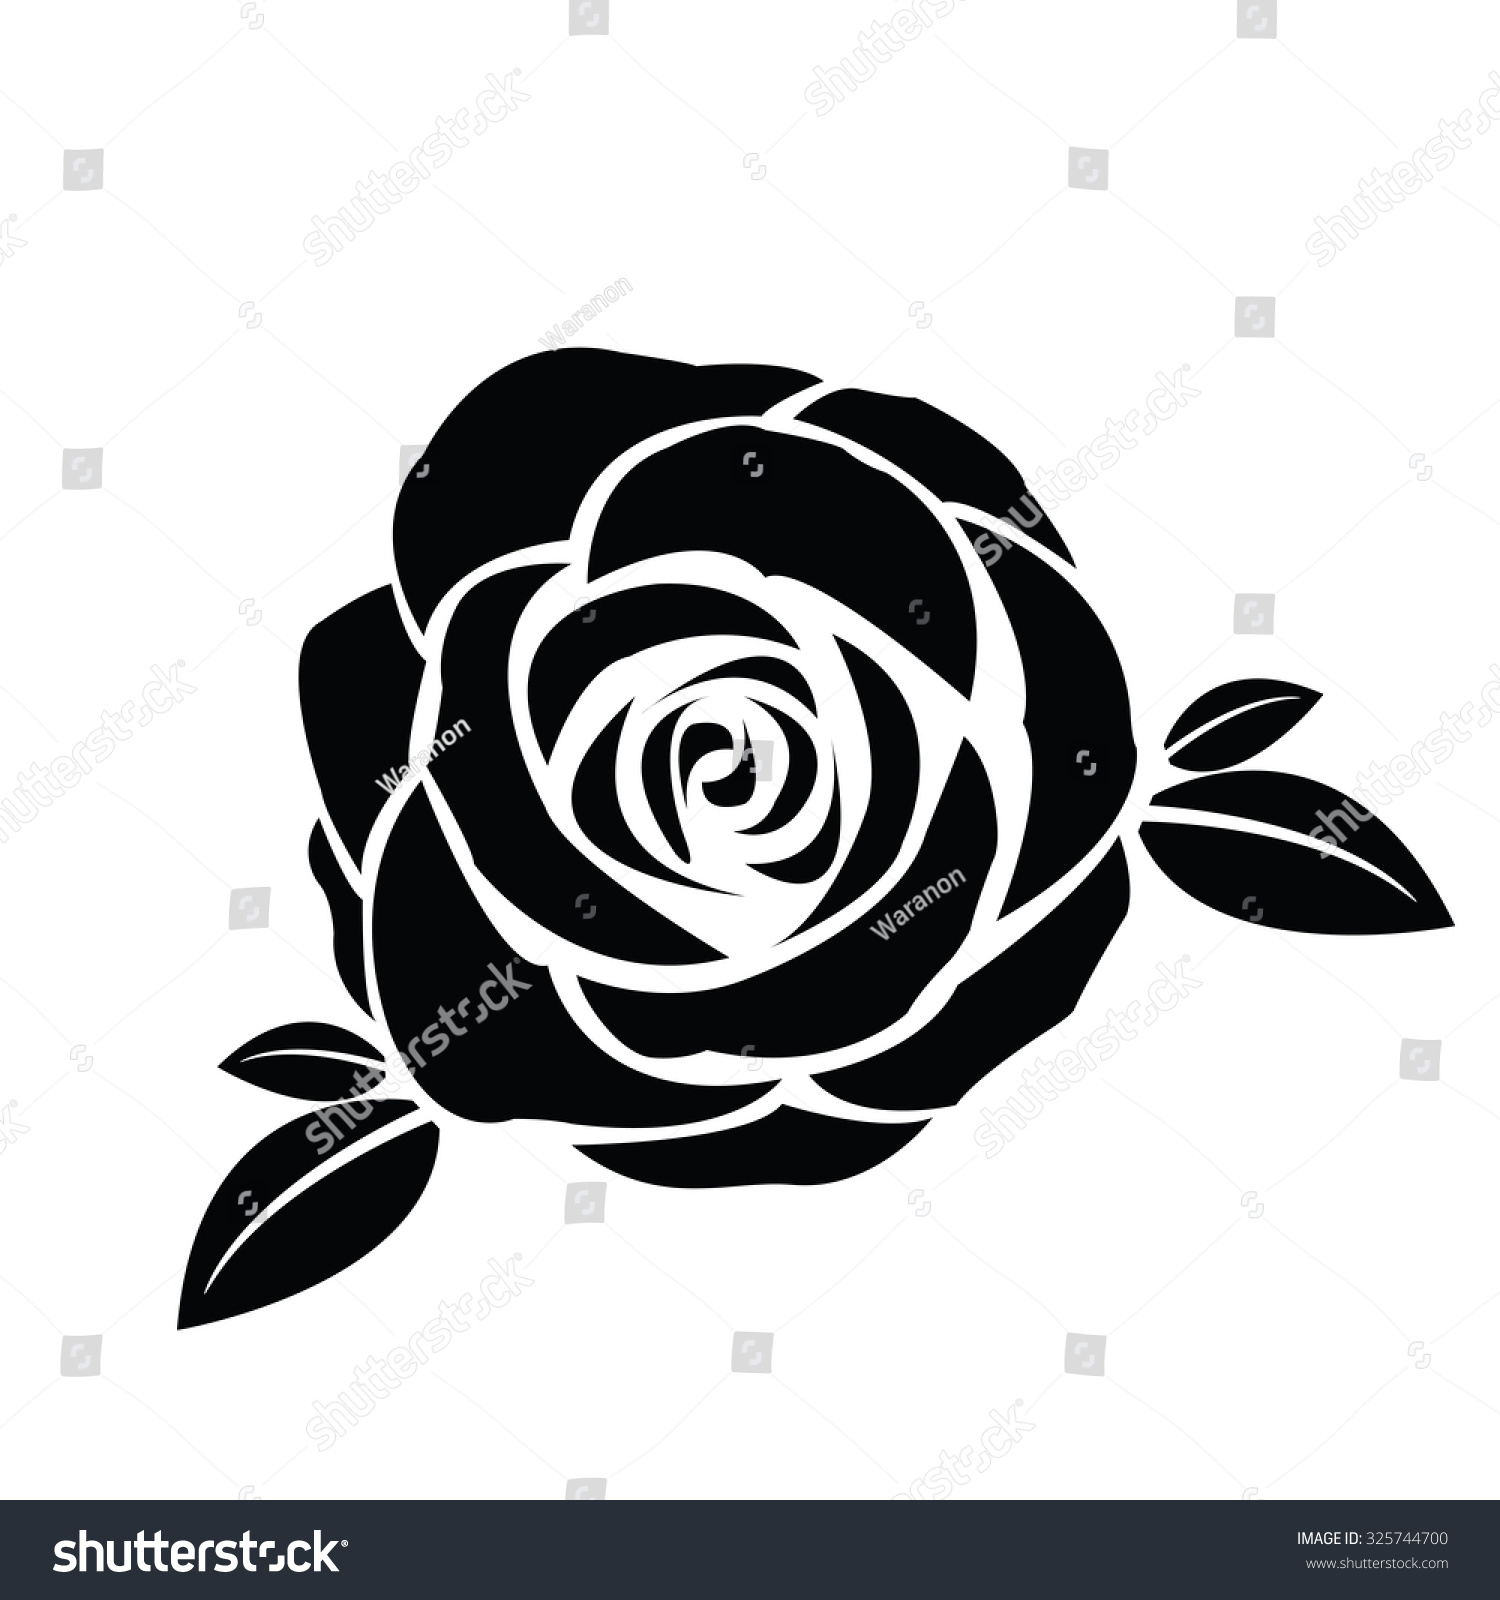 rose clipart silhouette - photo #25